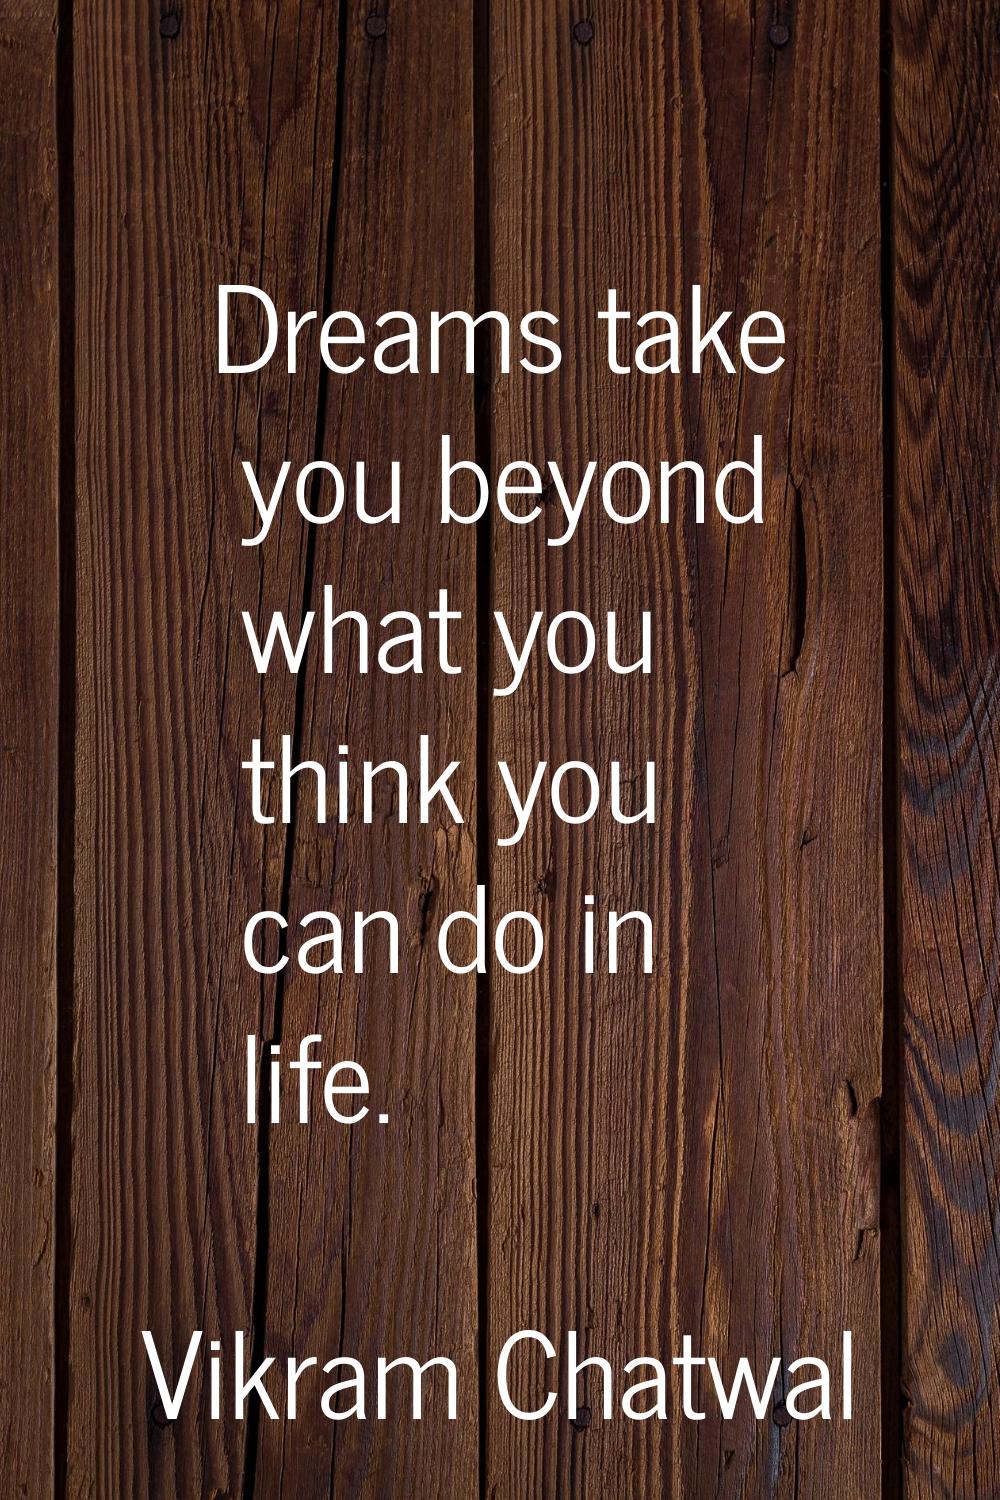 Dreams take you beyond what you think you can do in life.